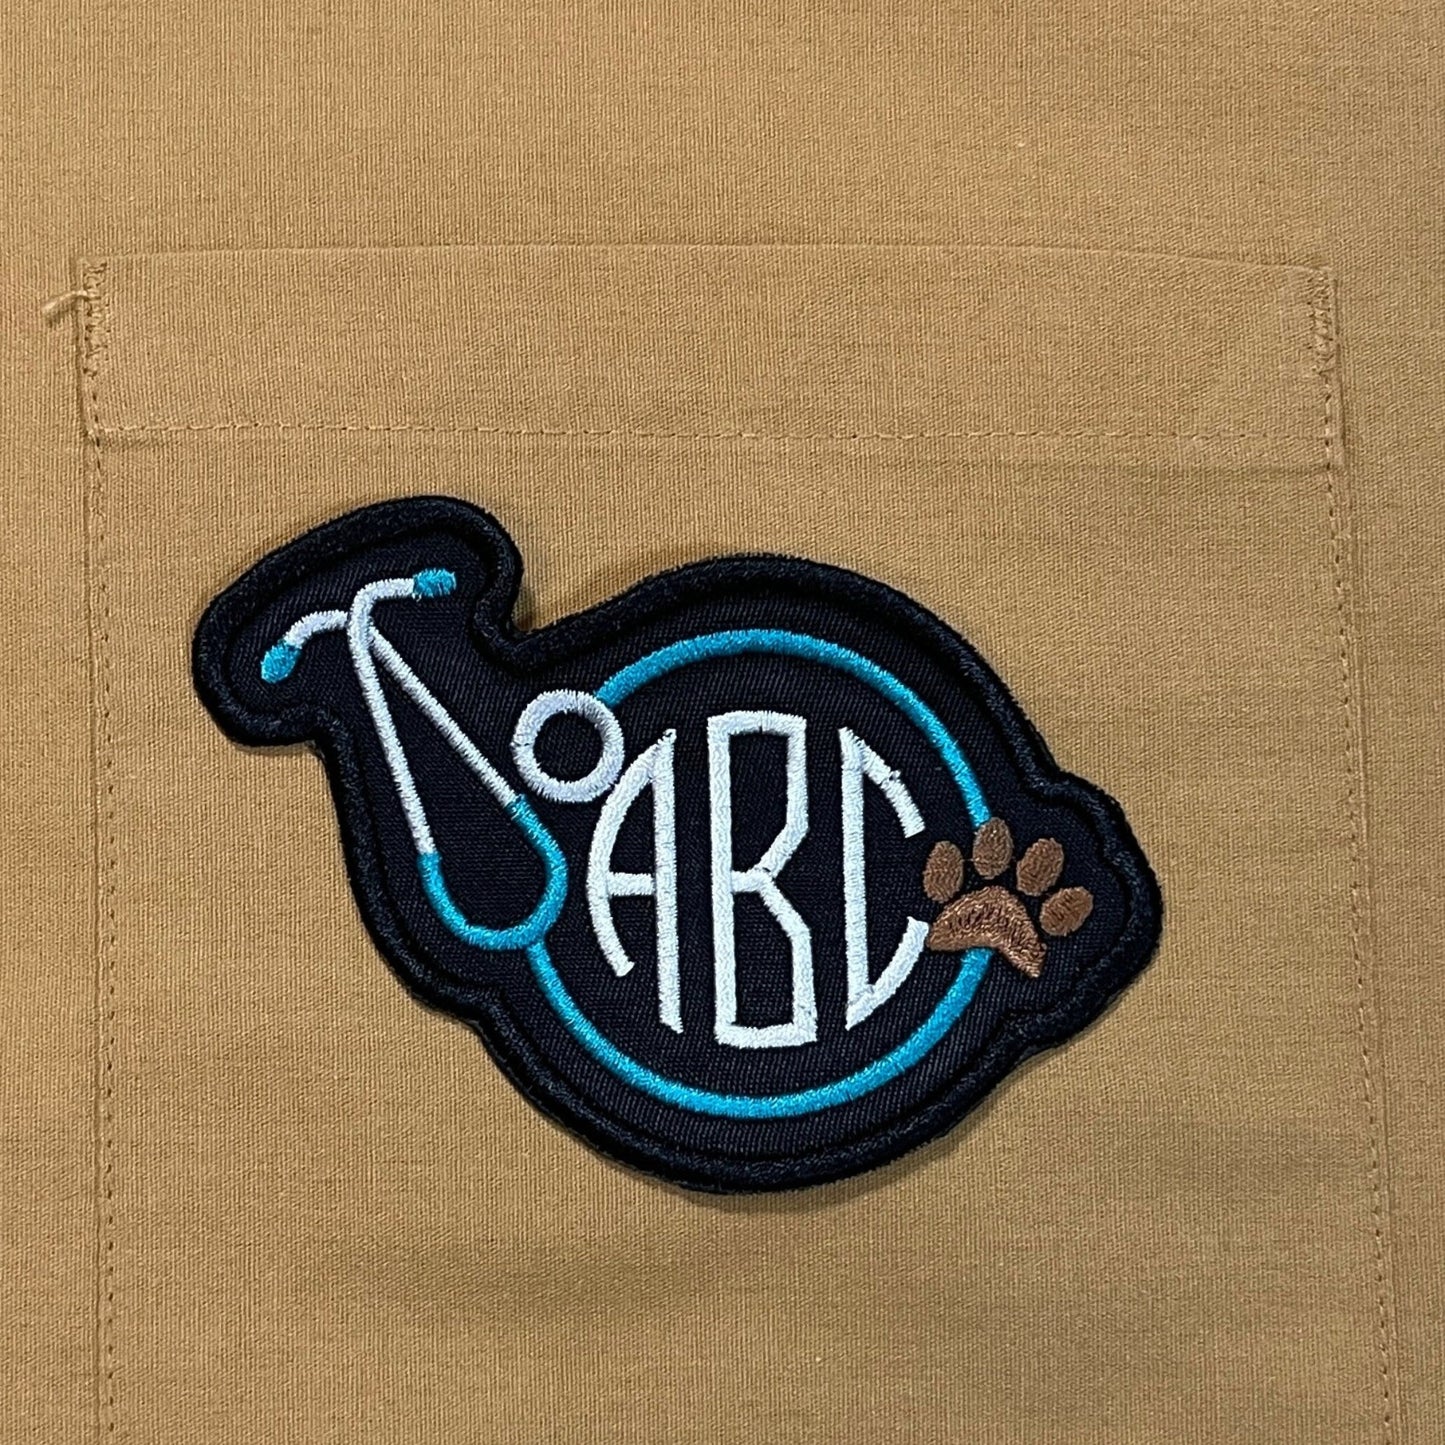 Veterinarian Staff Monogram Patch with Stethoscope and paw print